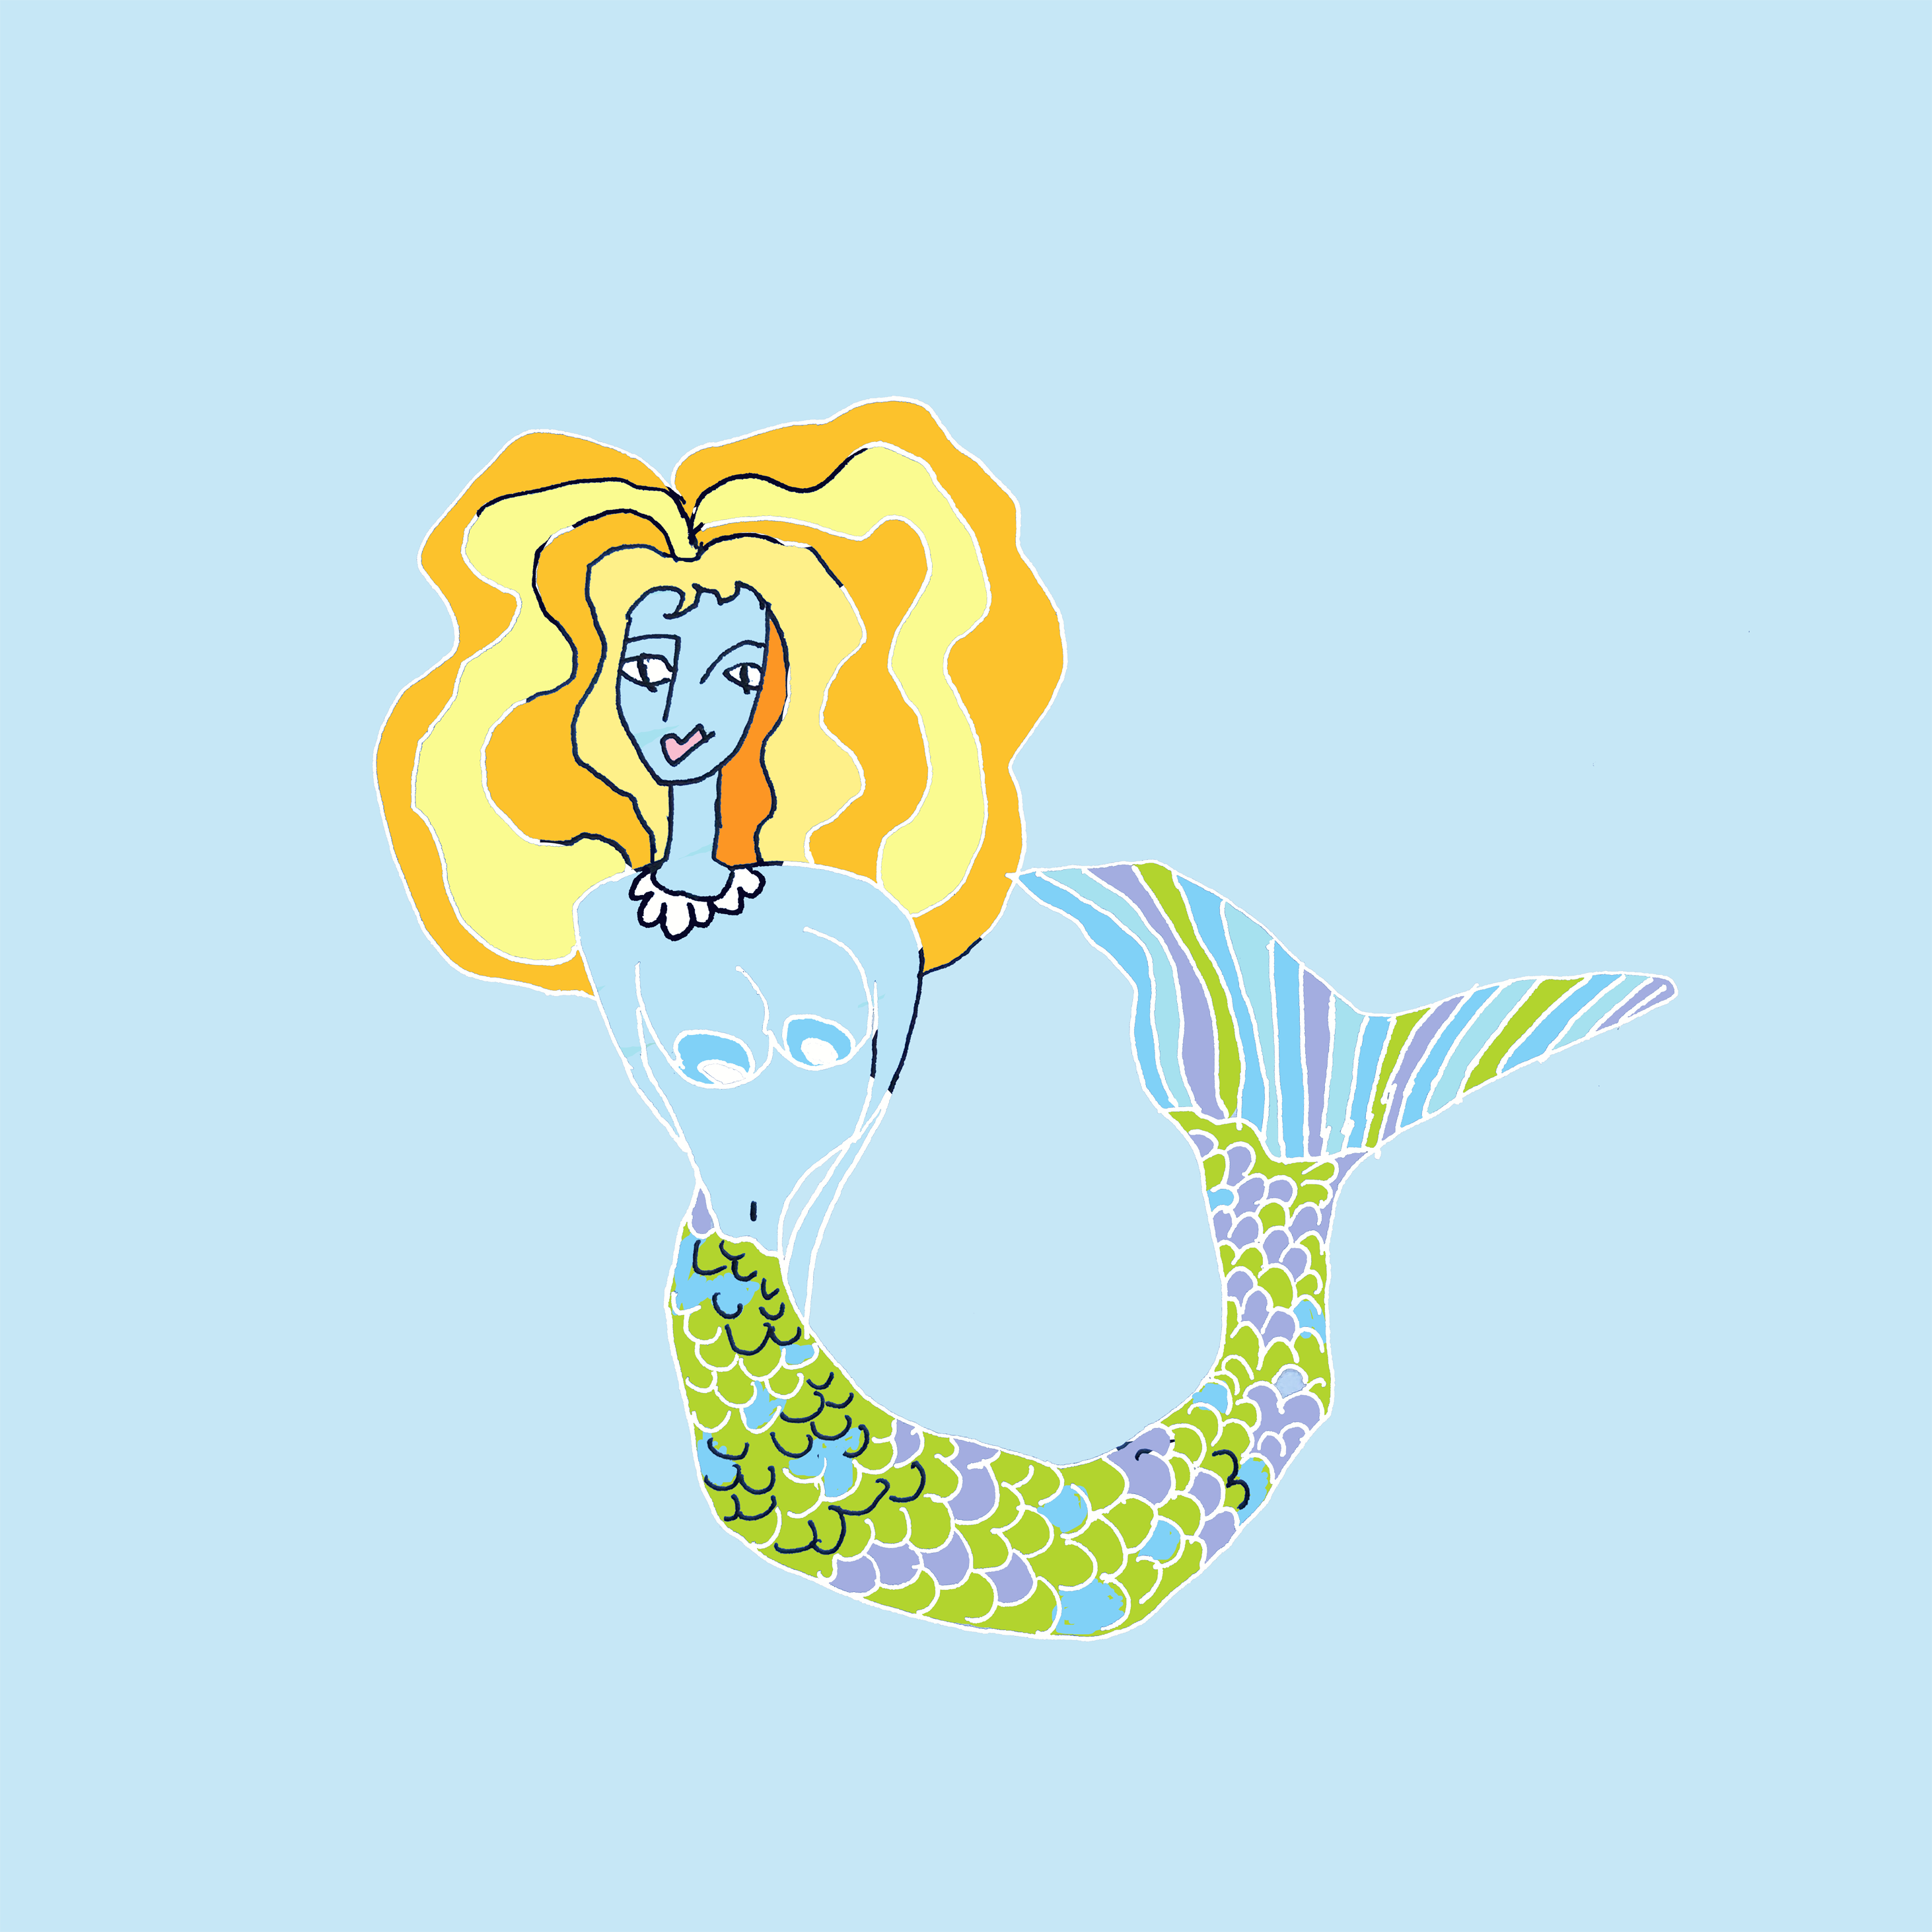 art every day number 267 / illustration / mermaid